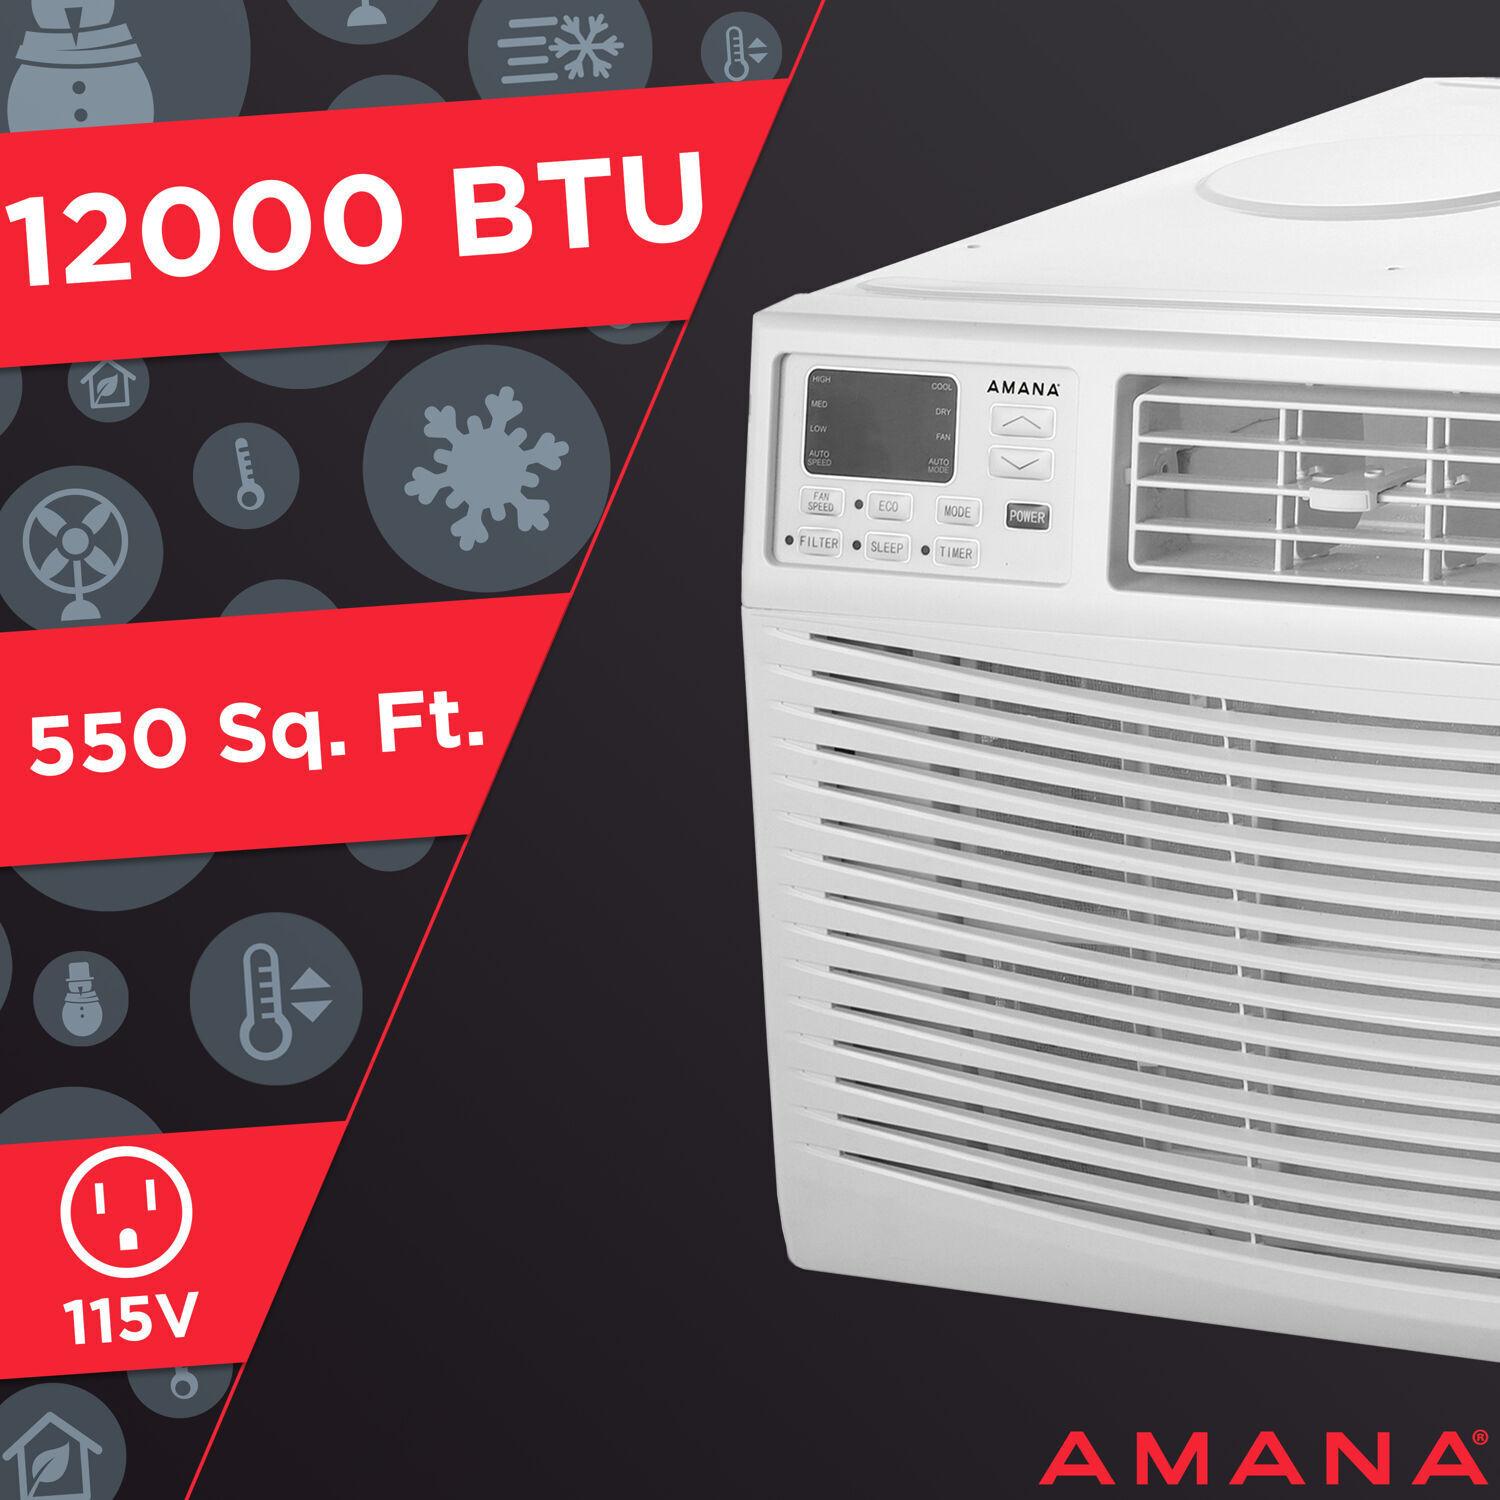 12,000 BTU 115V Window-Mounted Air Conditioner with Remote Control